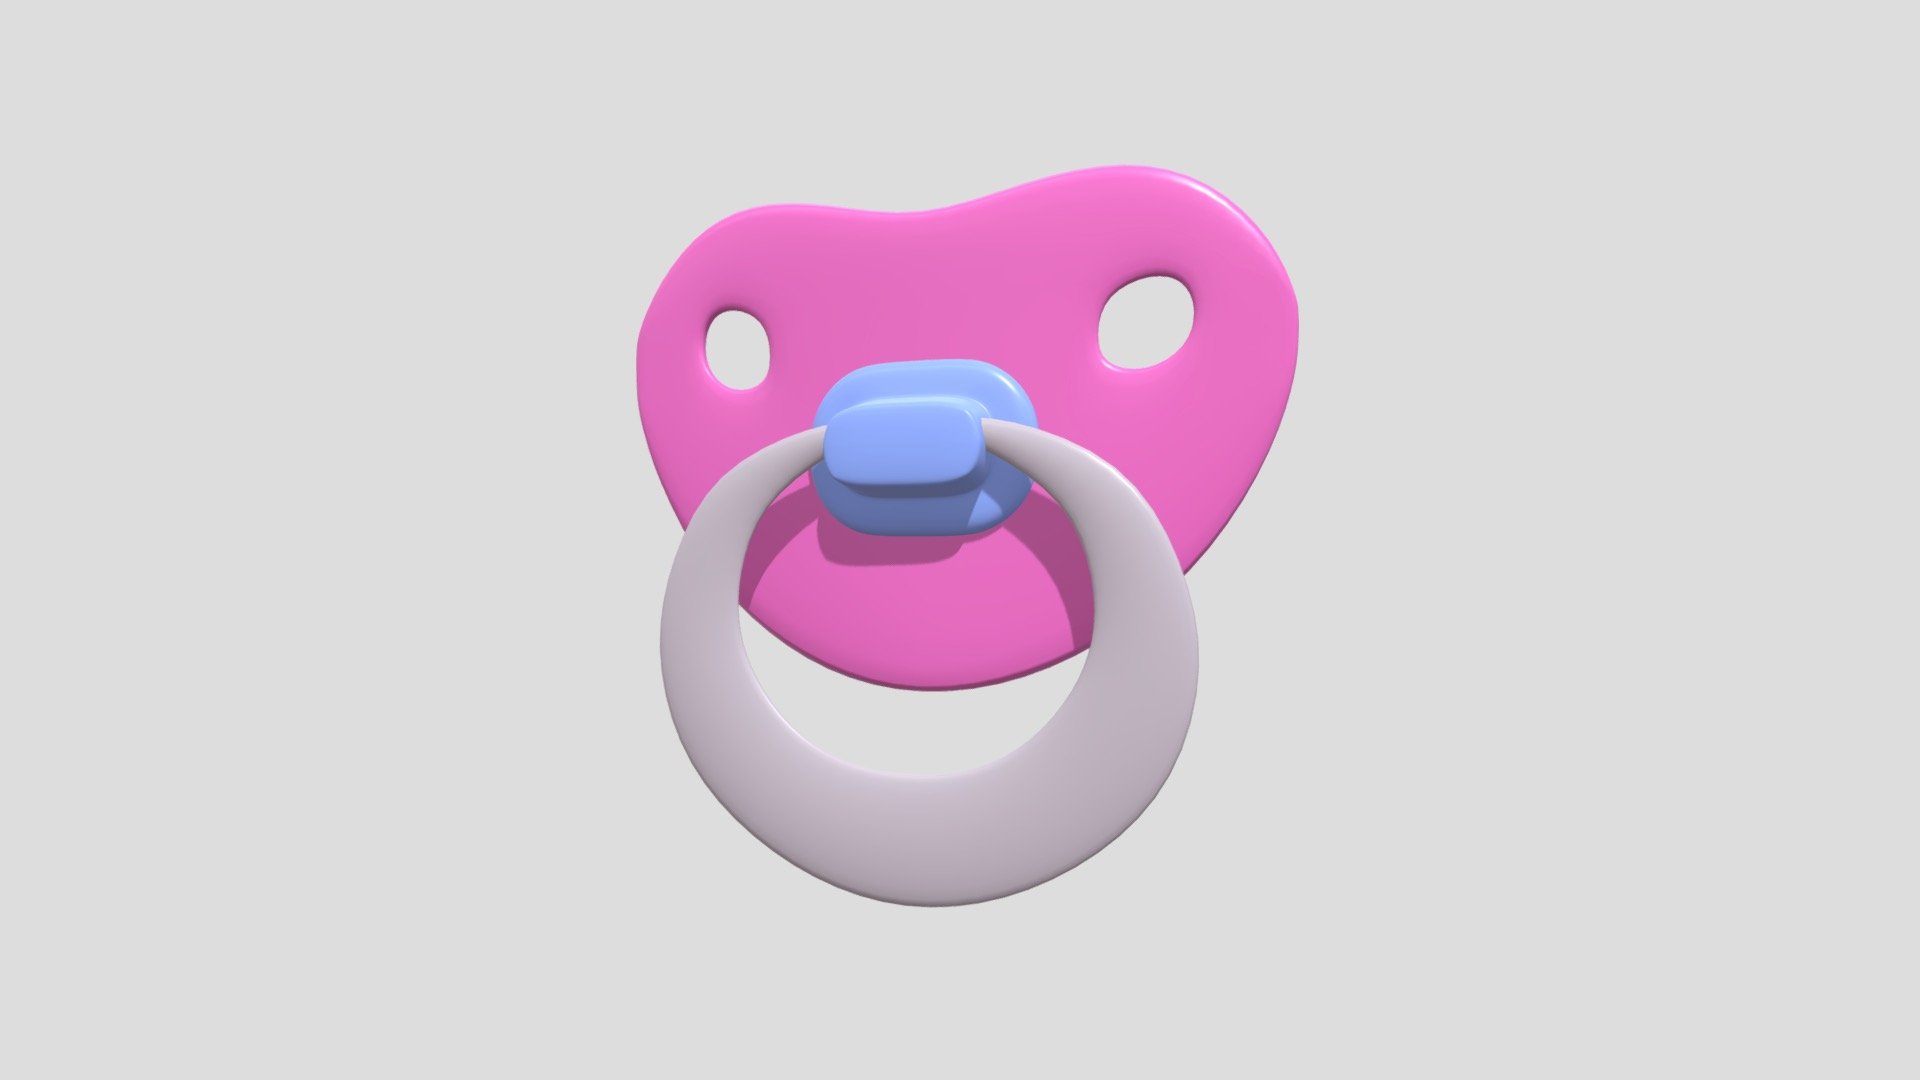 Textures: 1024 × 1024, Colors on texture: Pink, blue, yellow colors.

Materials: 1 - Pacifier

Smooth shaded.

Mirrored.

Subdivision Level: 1

Rigged.

Origin located on middle-center.

Polygons: 19744

Vertices: 9958

Formats: Fbx, Obj, Stl, Dae.

I hope you enjoy the model! - Pacifier - Buy Royalty Free 3D model by Ed+ (@EDplus) 3d model